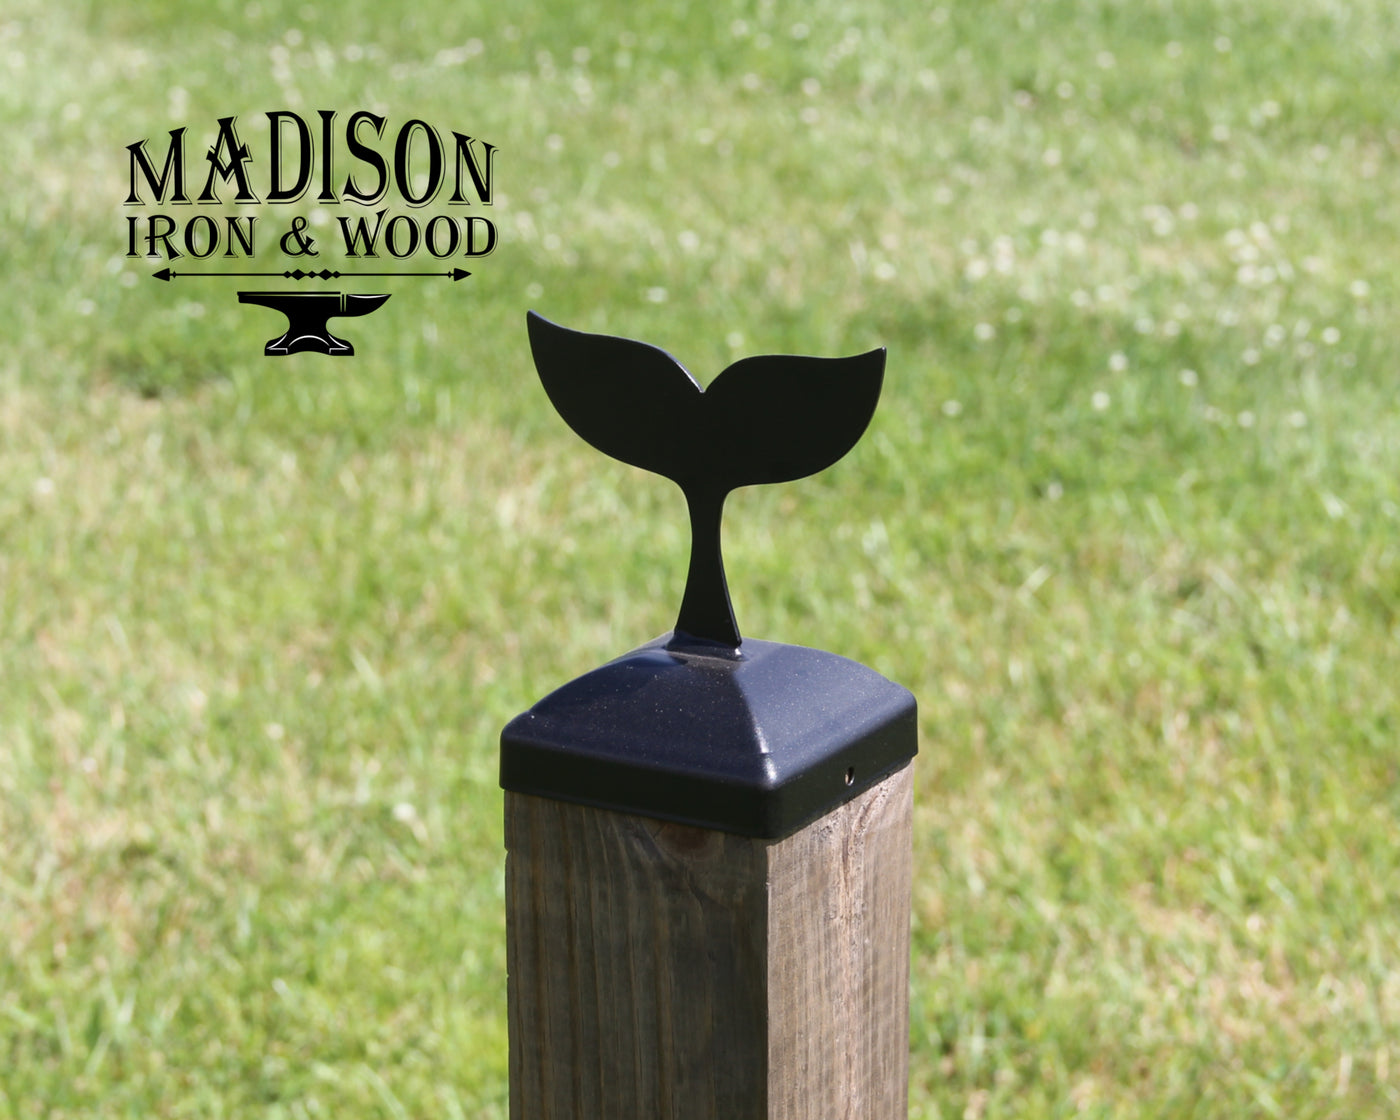 4x4 Whale Tail Post Cap - Madison Iron and Wood - Post Cap - metal outdoor decor - Steel deocrations - american made products - veteran owned business products - fencing decorations - fencing supplies - custom wall decorations - personalized wall signs - steel - decorative post caps - steel post caps - metal post caps - brackets - structural brackets - home improvement - easter - easter decorations - easter gift - easter yard decor